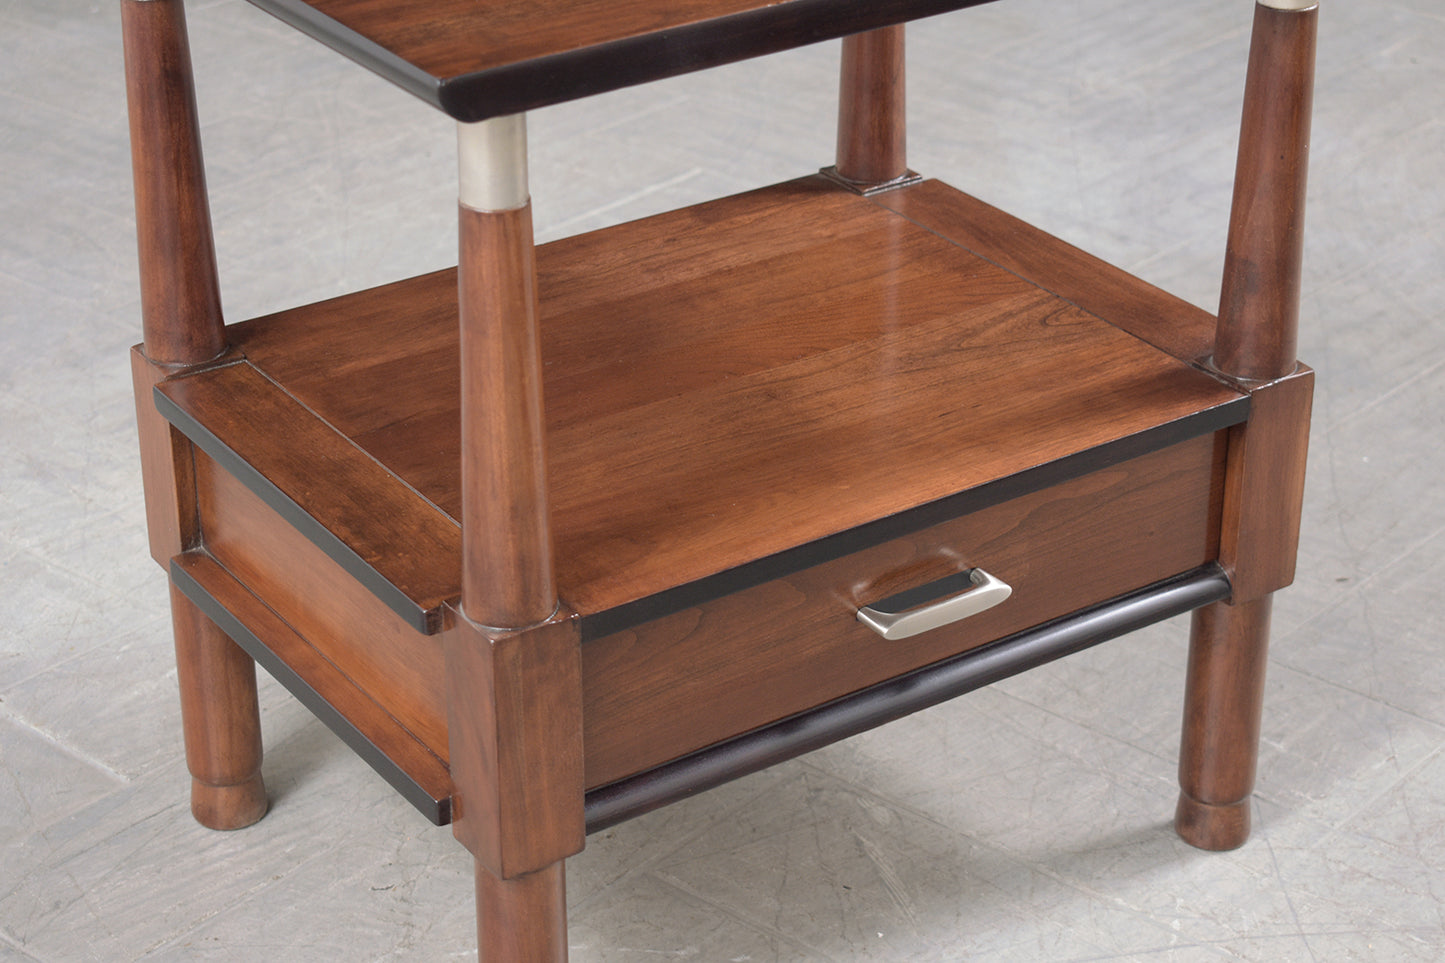 Refined Mid-Century Modern Nightstands: A Blend of Elegance and Functionality